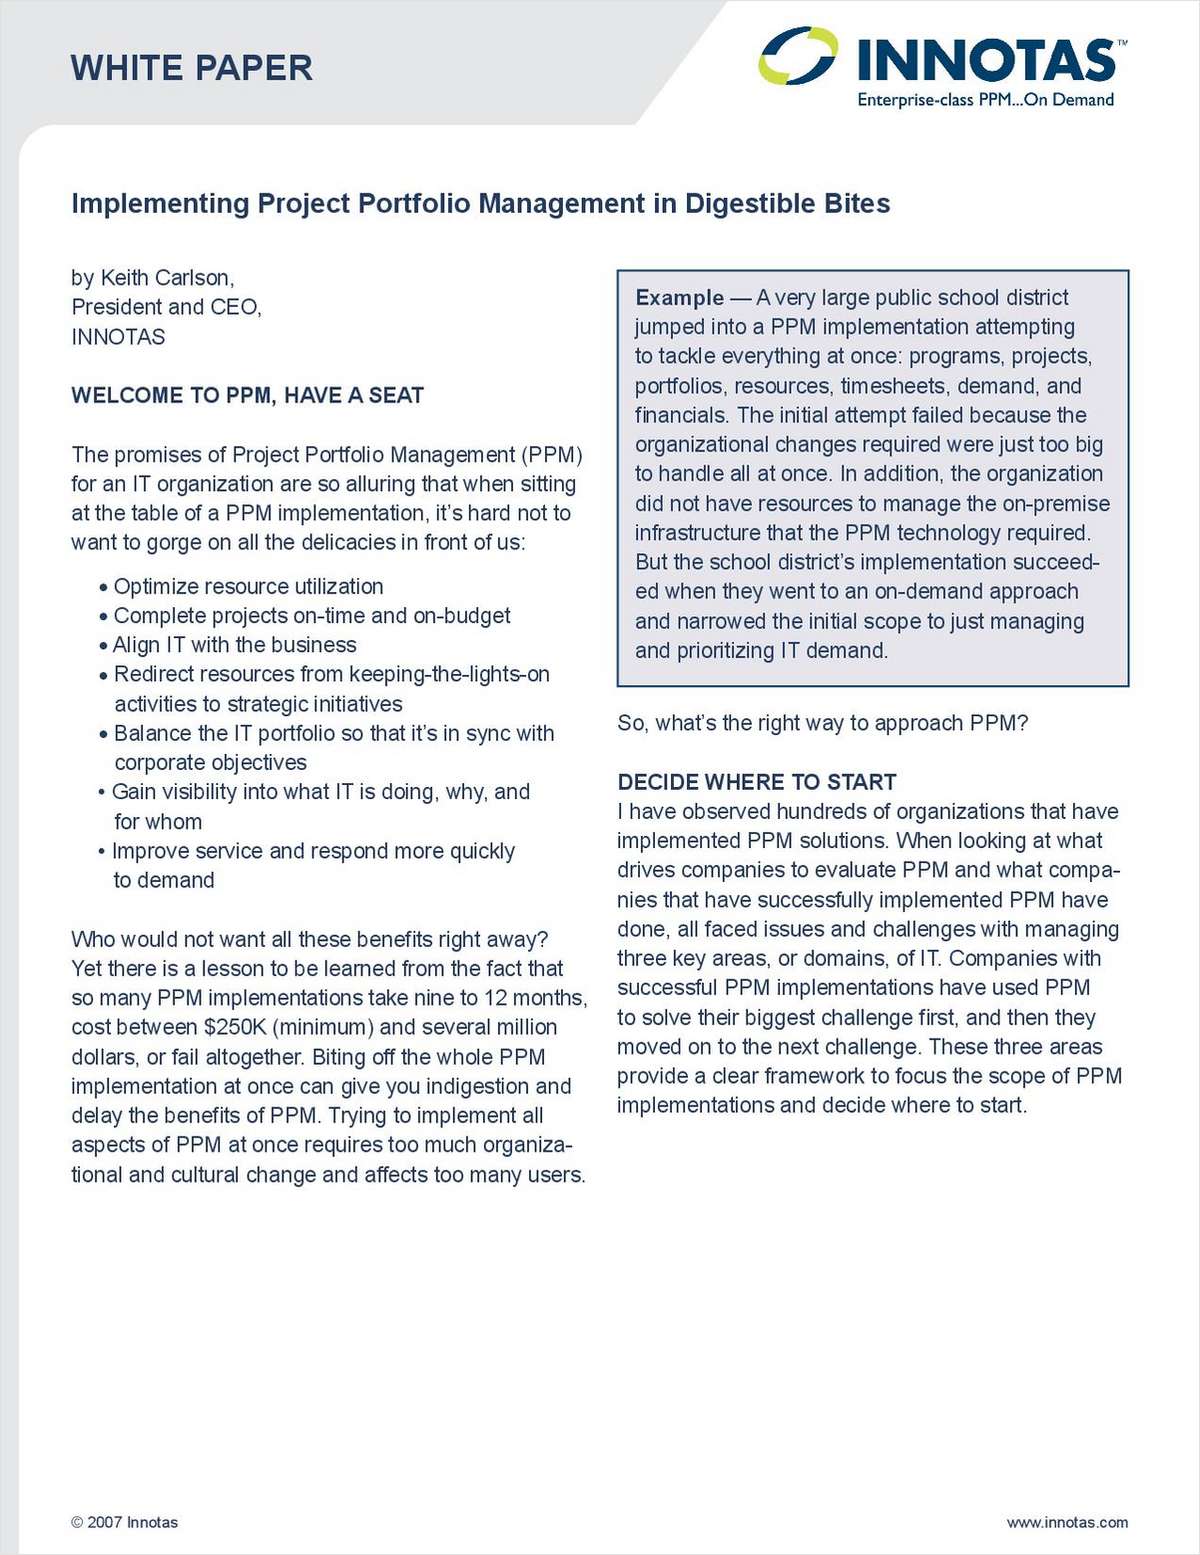 Implementing Project Portfolio Management in Digestible Bites